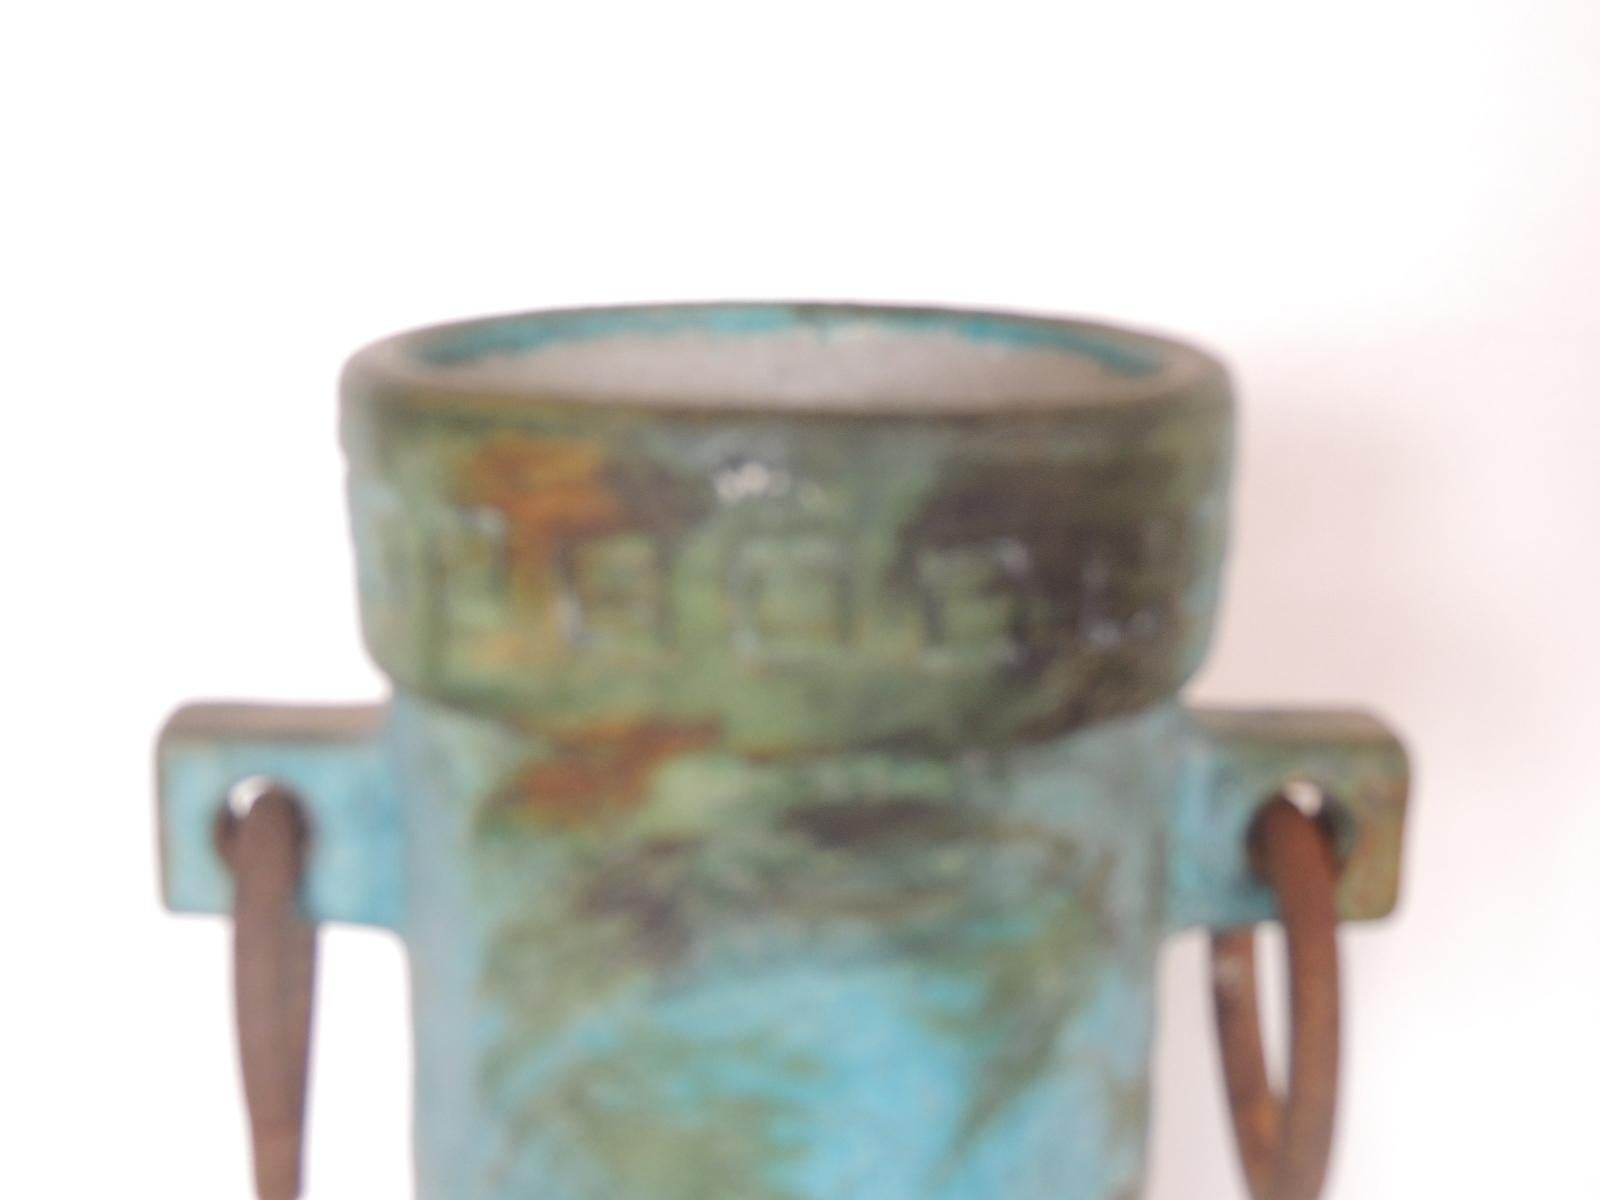 Mid-Century Modern aqua and green hand painted pottery vase with iron handles.
MOD style Italian round vase with indented details all around base and top.
with two round rustic iron handles.
Signed: ITALY
Size: 5